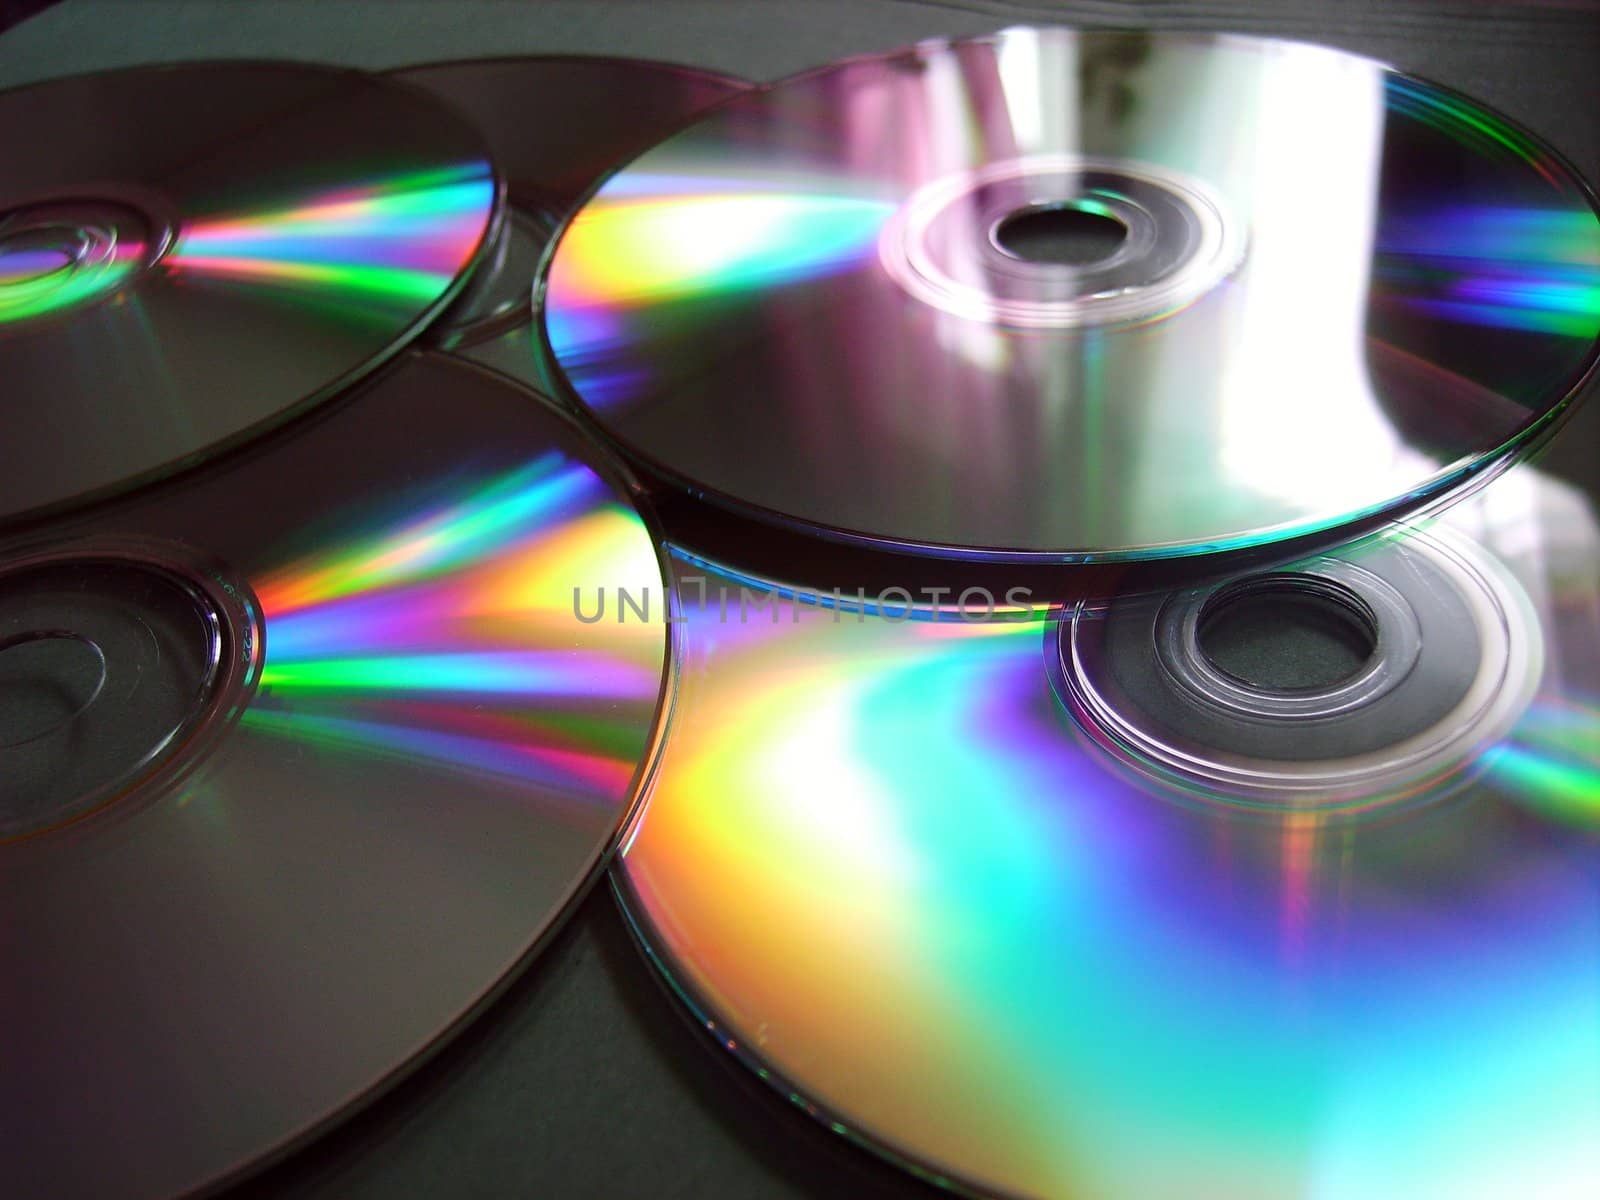 close-up of compact disks with reflections of color